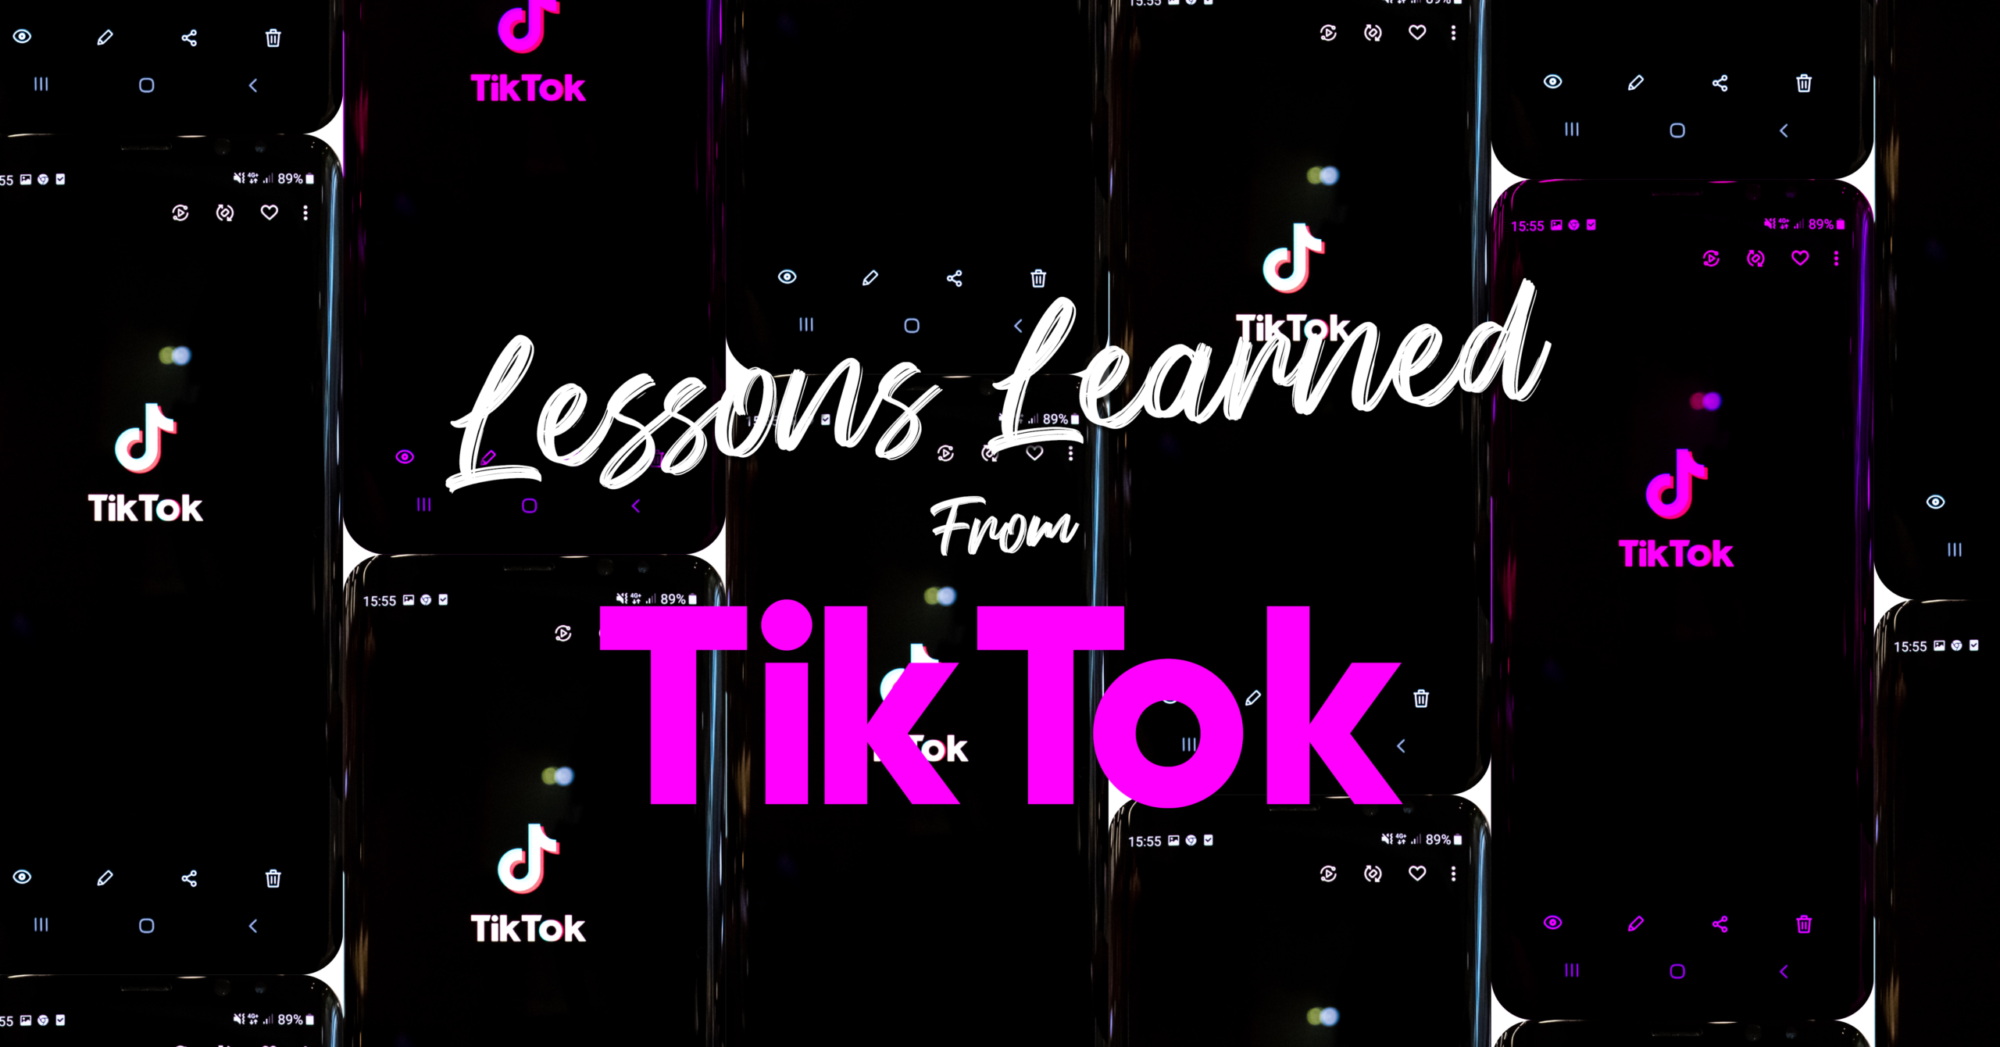 Lessons Learned from TikTok text over a black background with TikTok logos